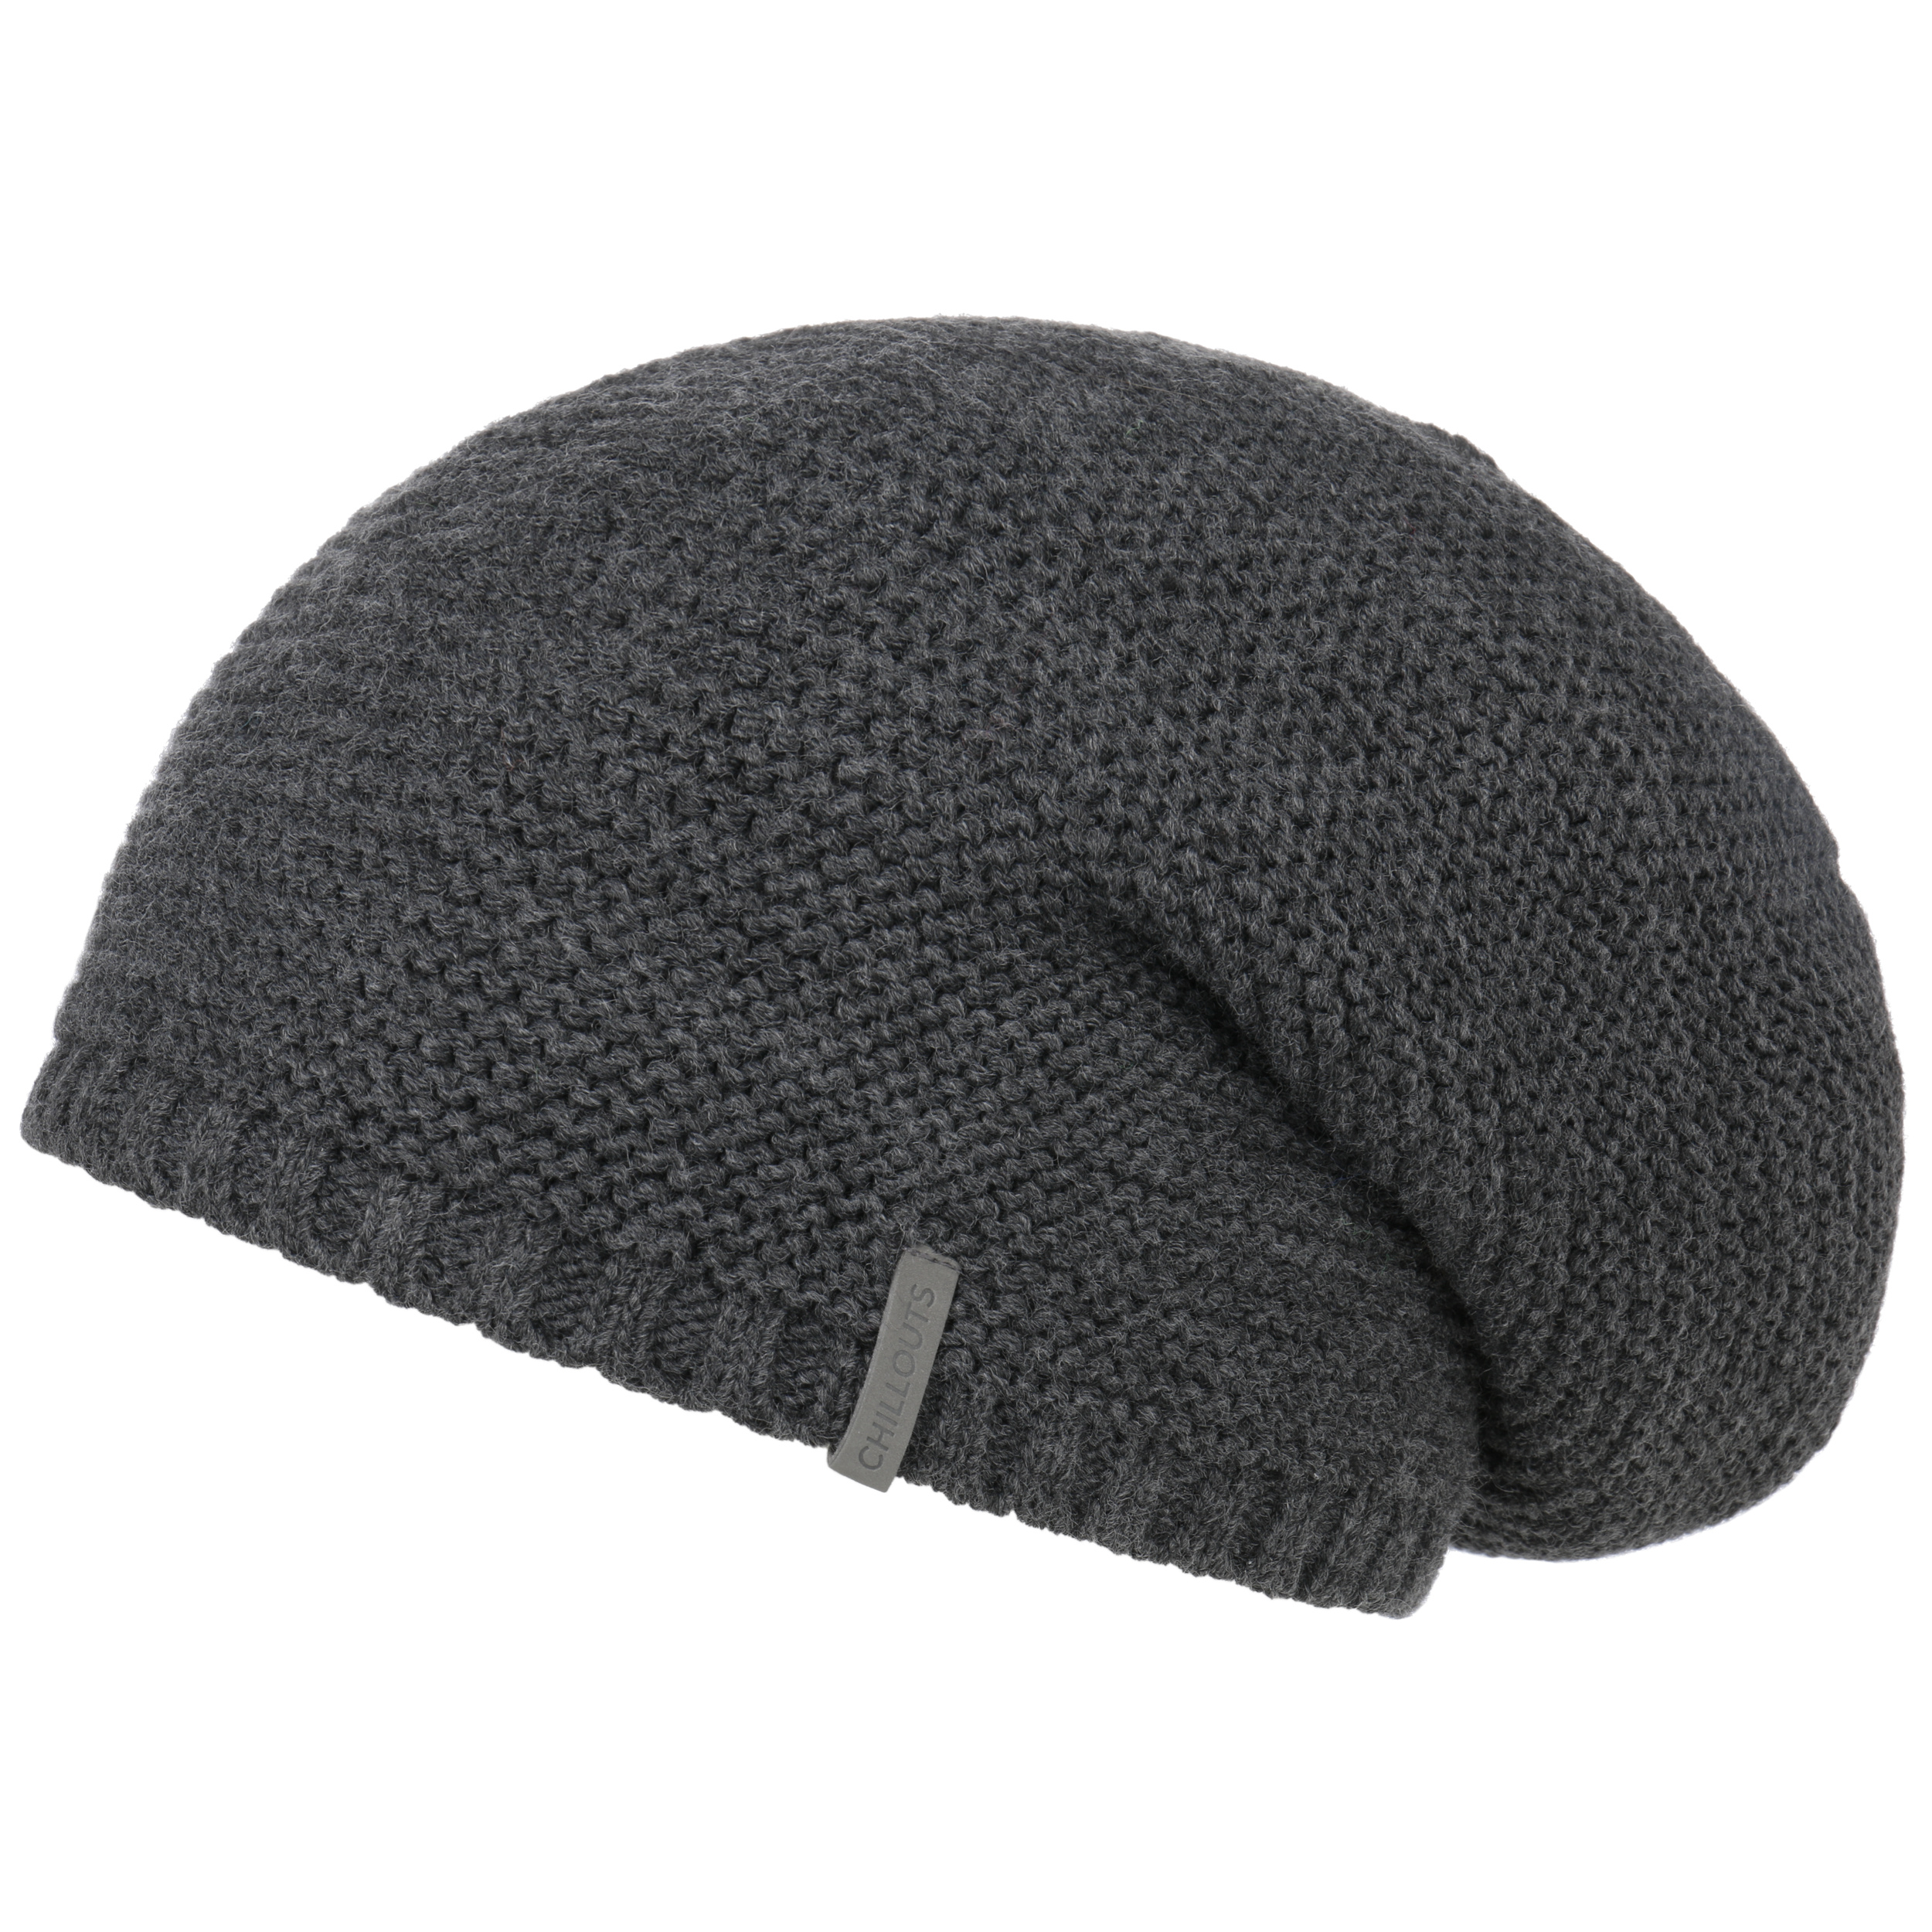 by Beanie Chillouts - Keith 34,99 €